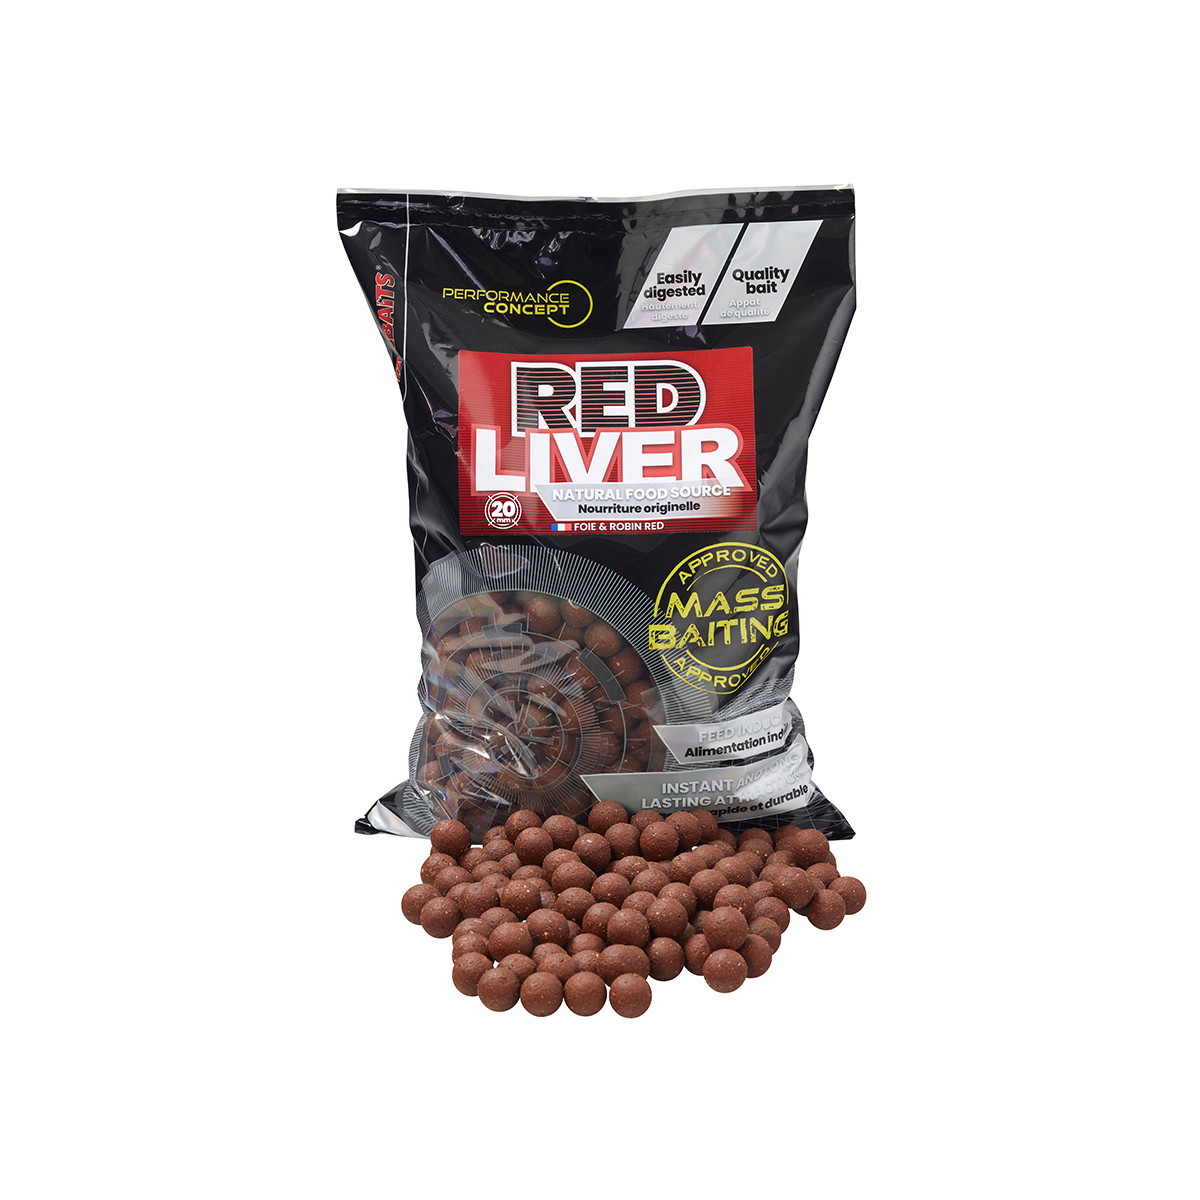 STARBAITS PC RED LIVER MASS BAITING